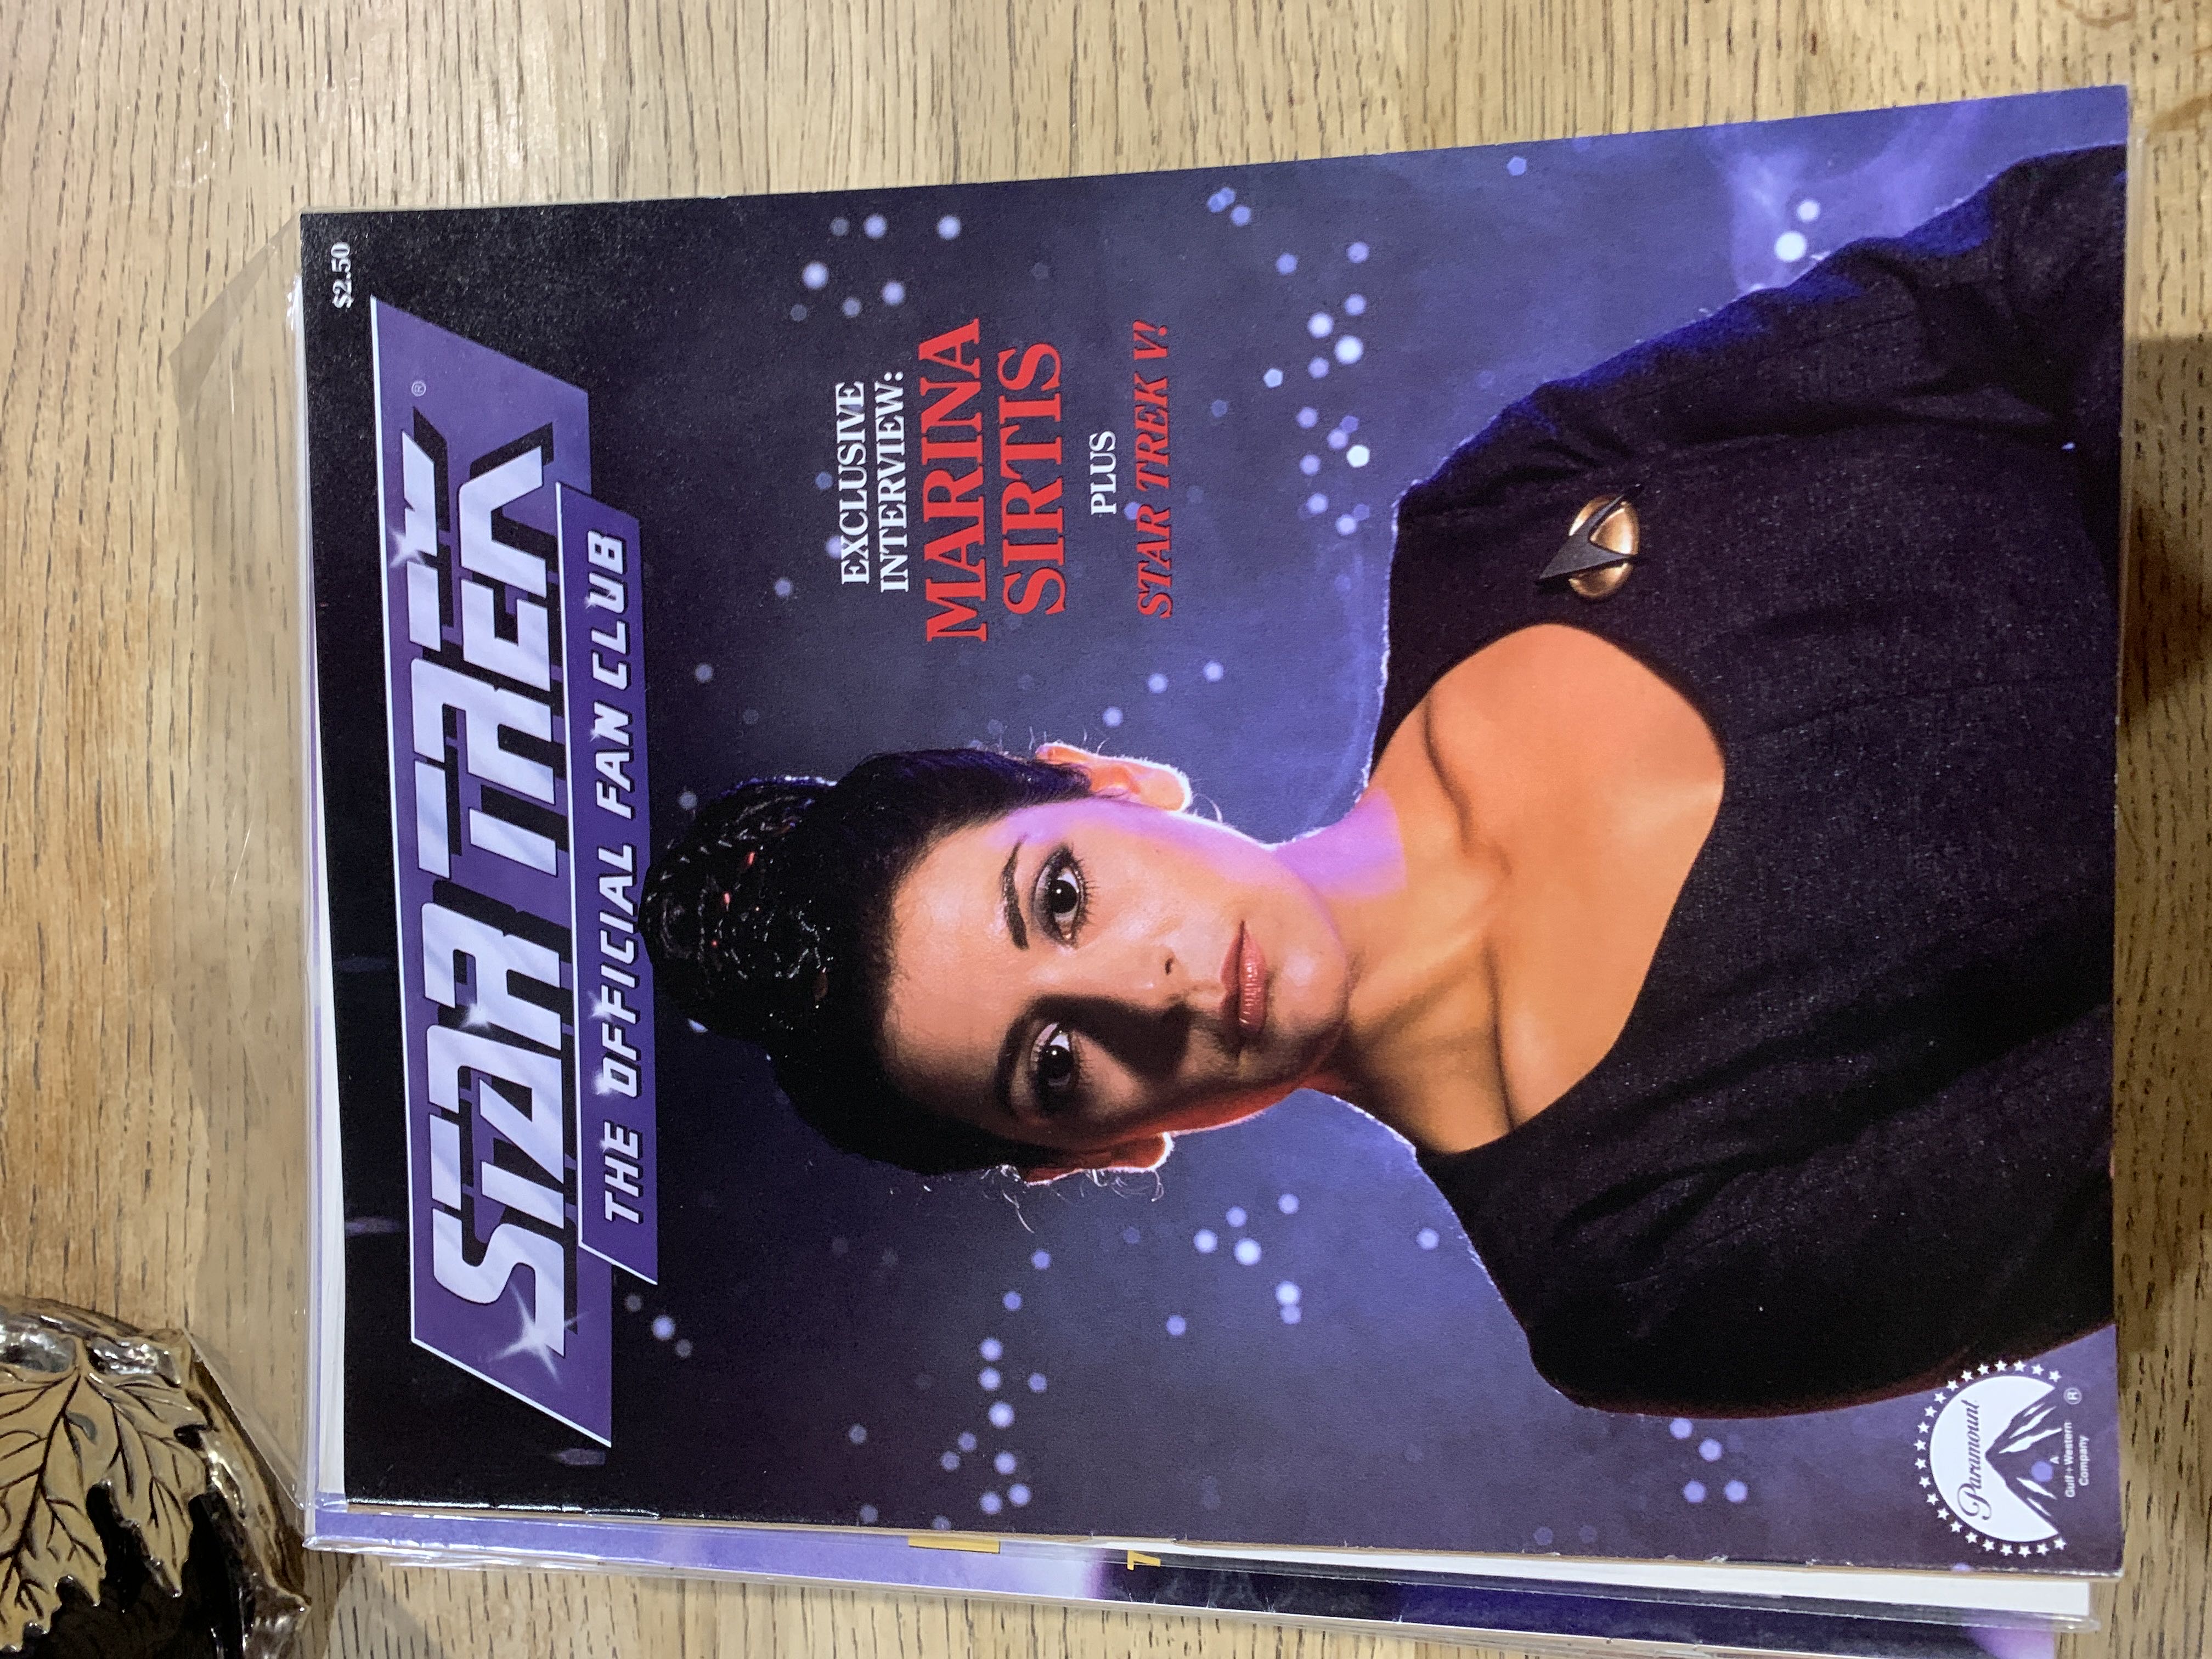 Star Trek The Official Fan Club Magazine  (October) magazine collectible - Main Image 1